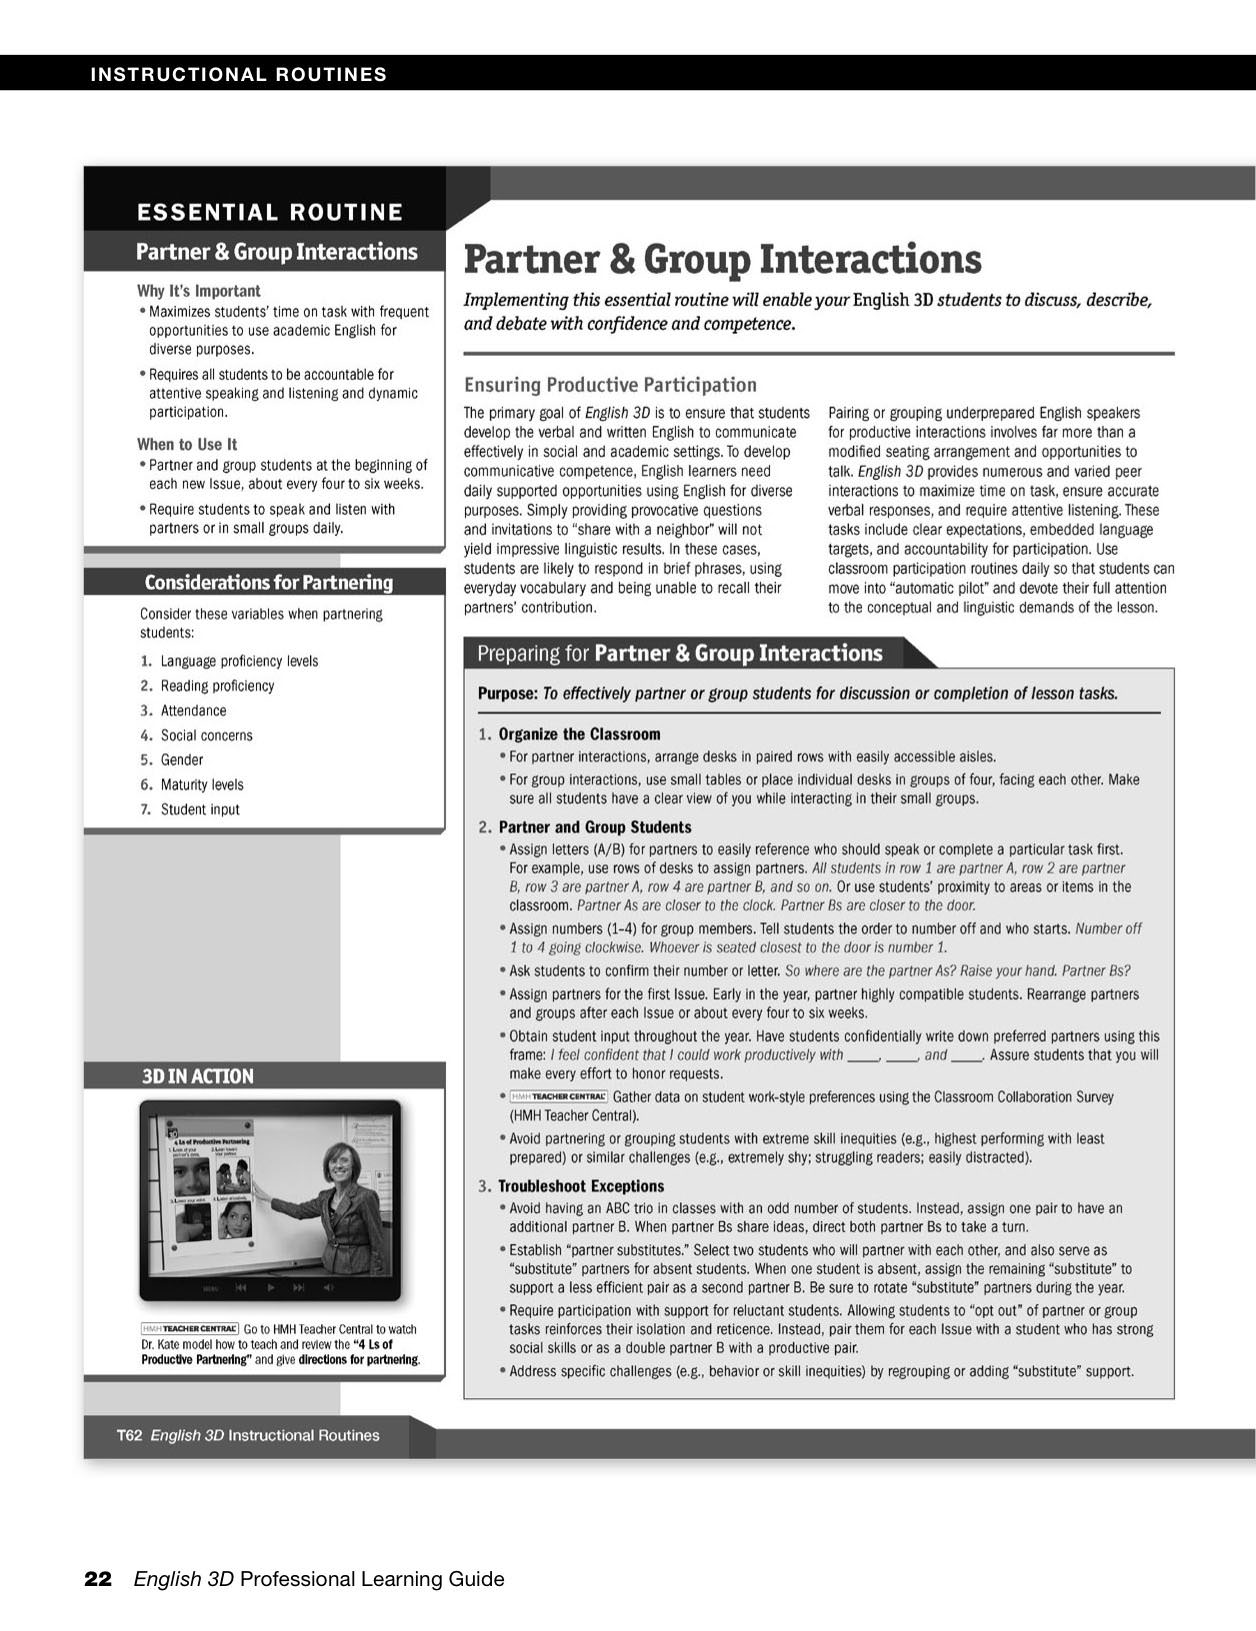 Professional Learning Guide Cource C